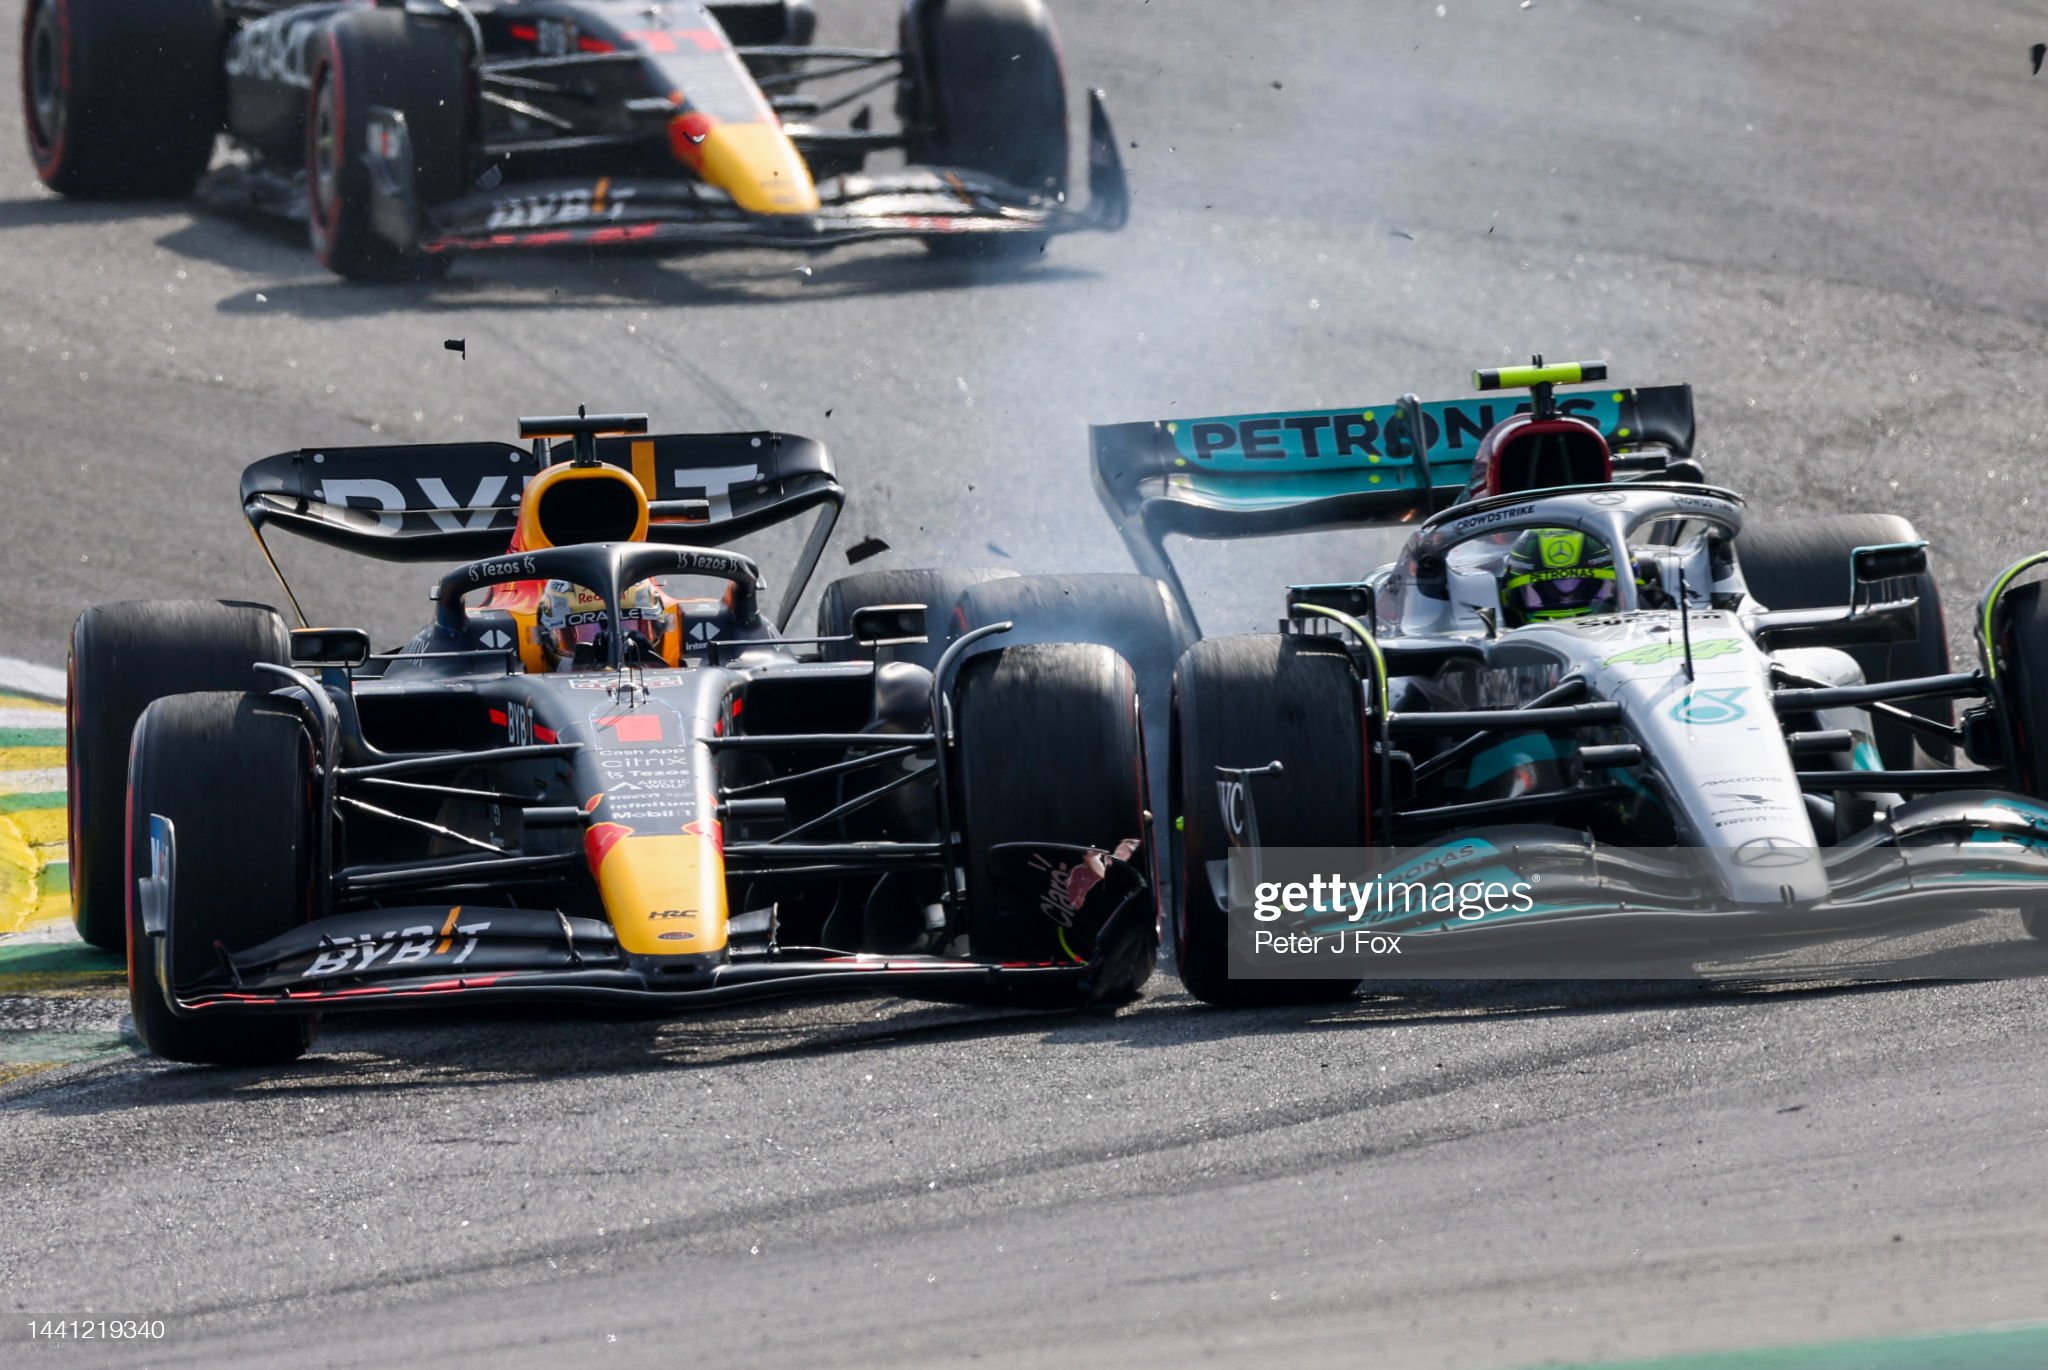 Max Verstappen of Red Bull Racing and The Netherlands and Lewis Hamilton of Mercedes and Great Britain clash at turn 2 during the F1 Grand Prix of Brazil.